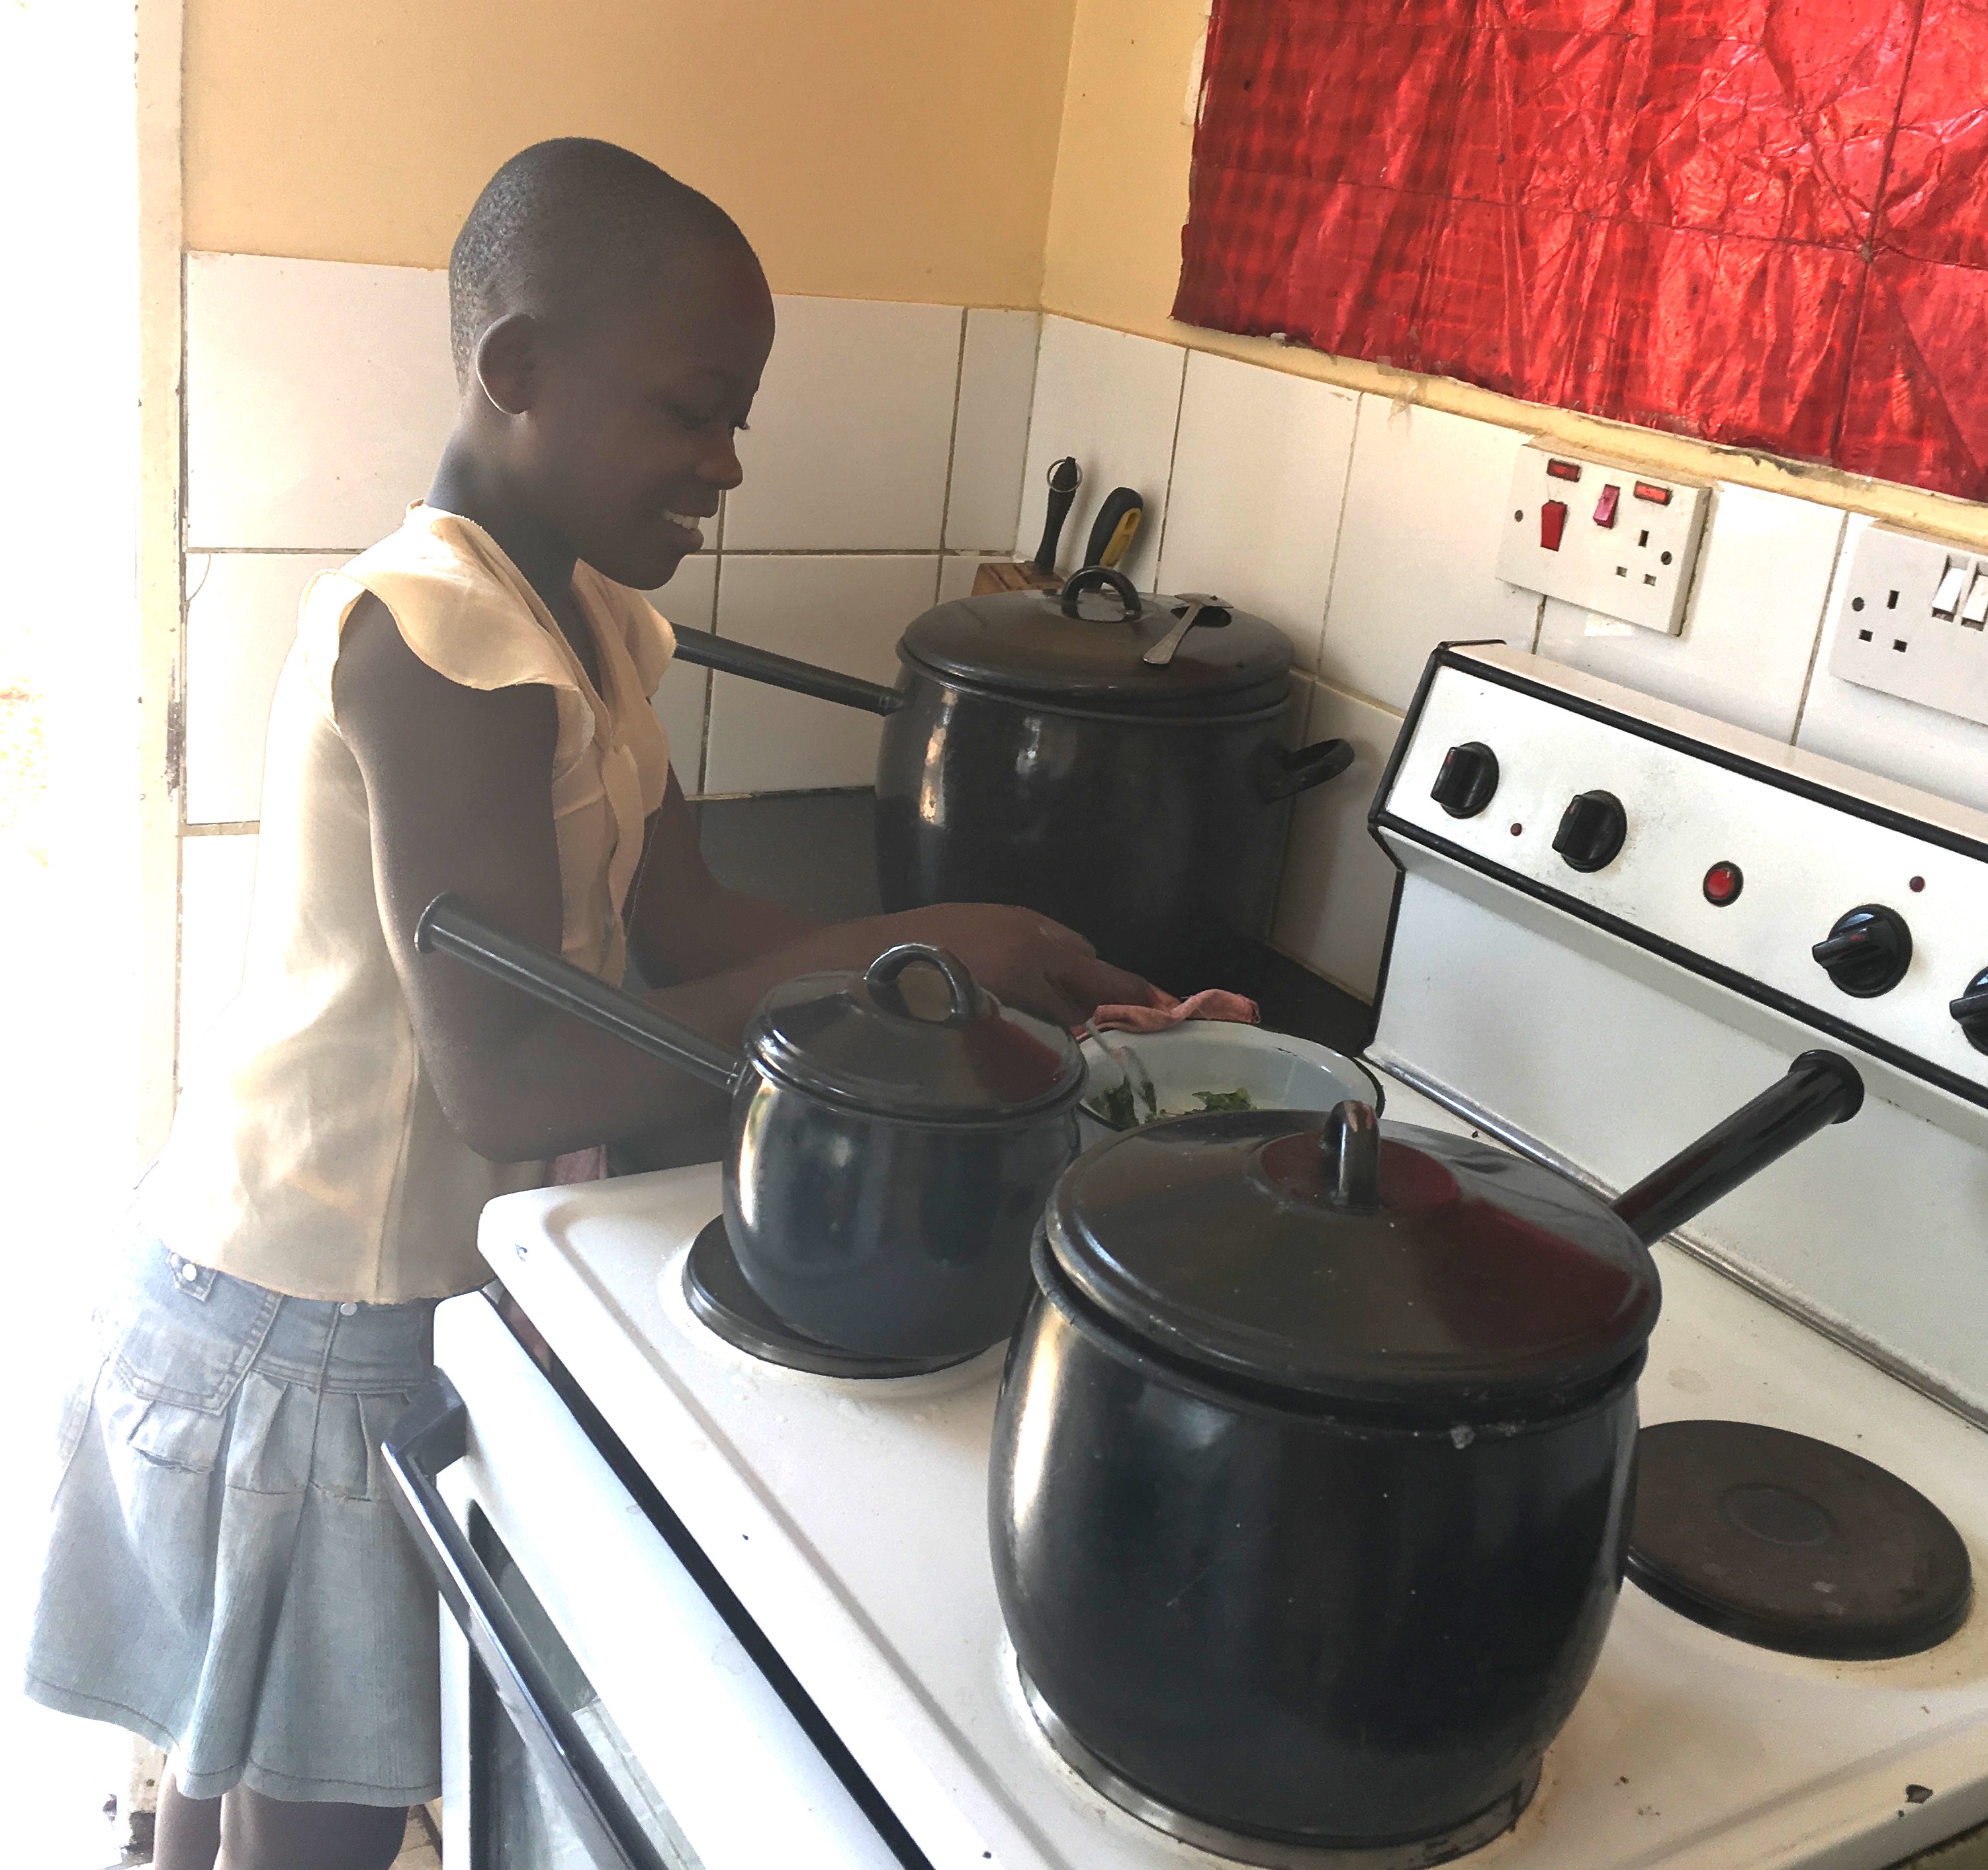 A child, new to the home, helps cook the dinner as she waits for a placement in school